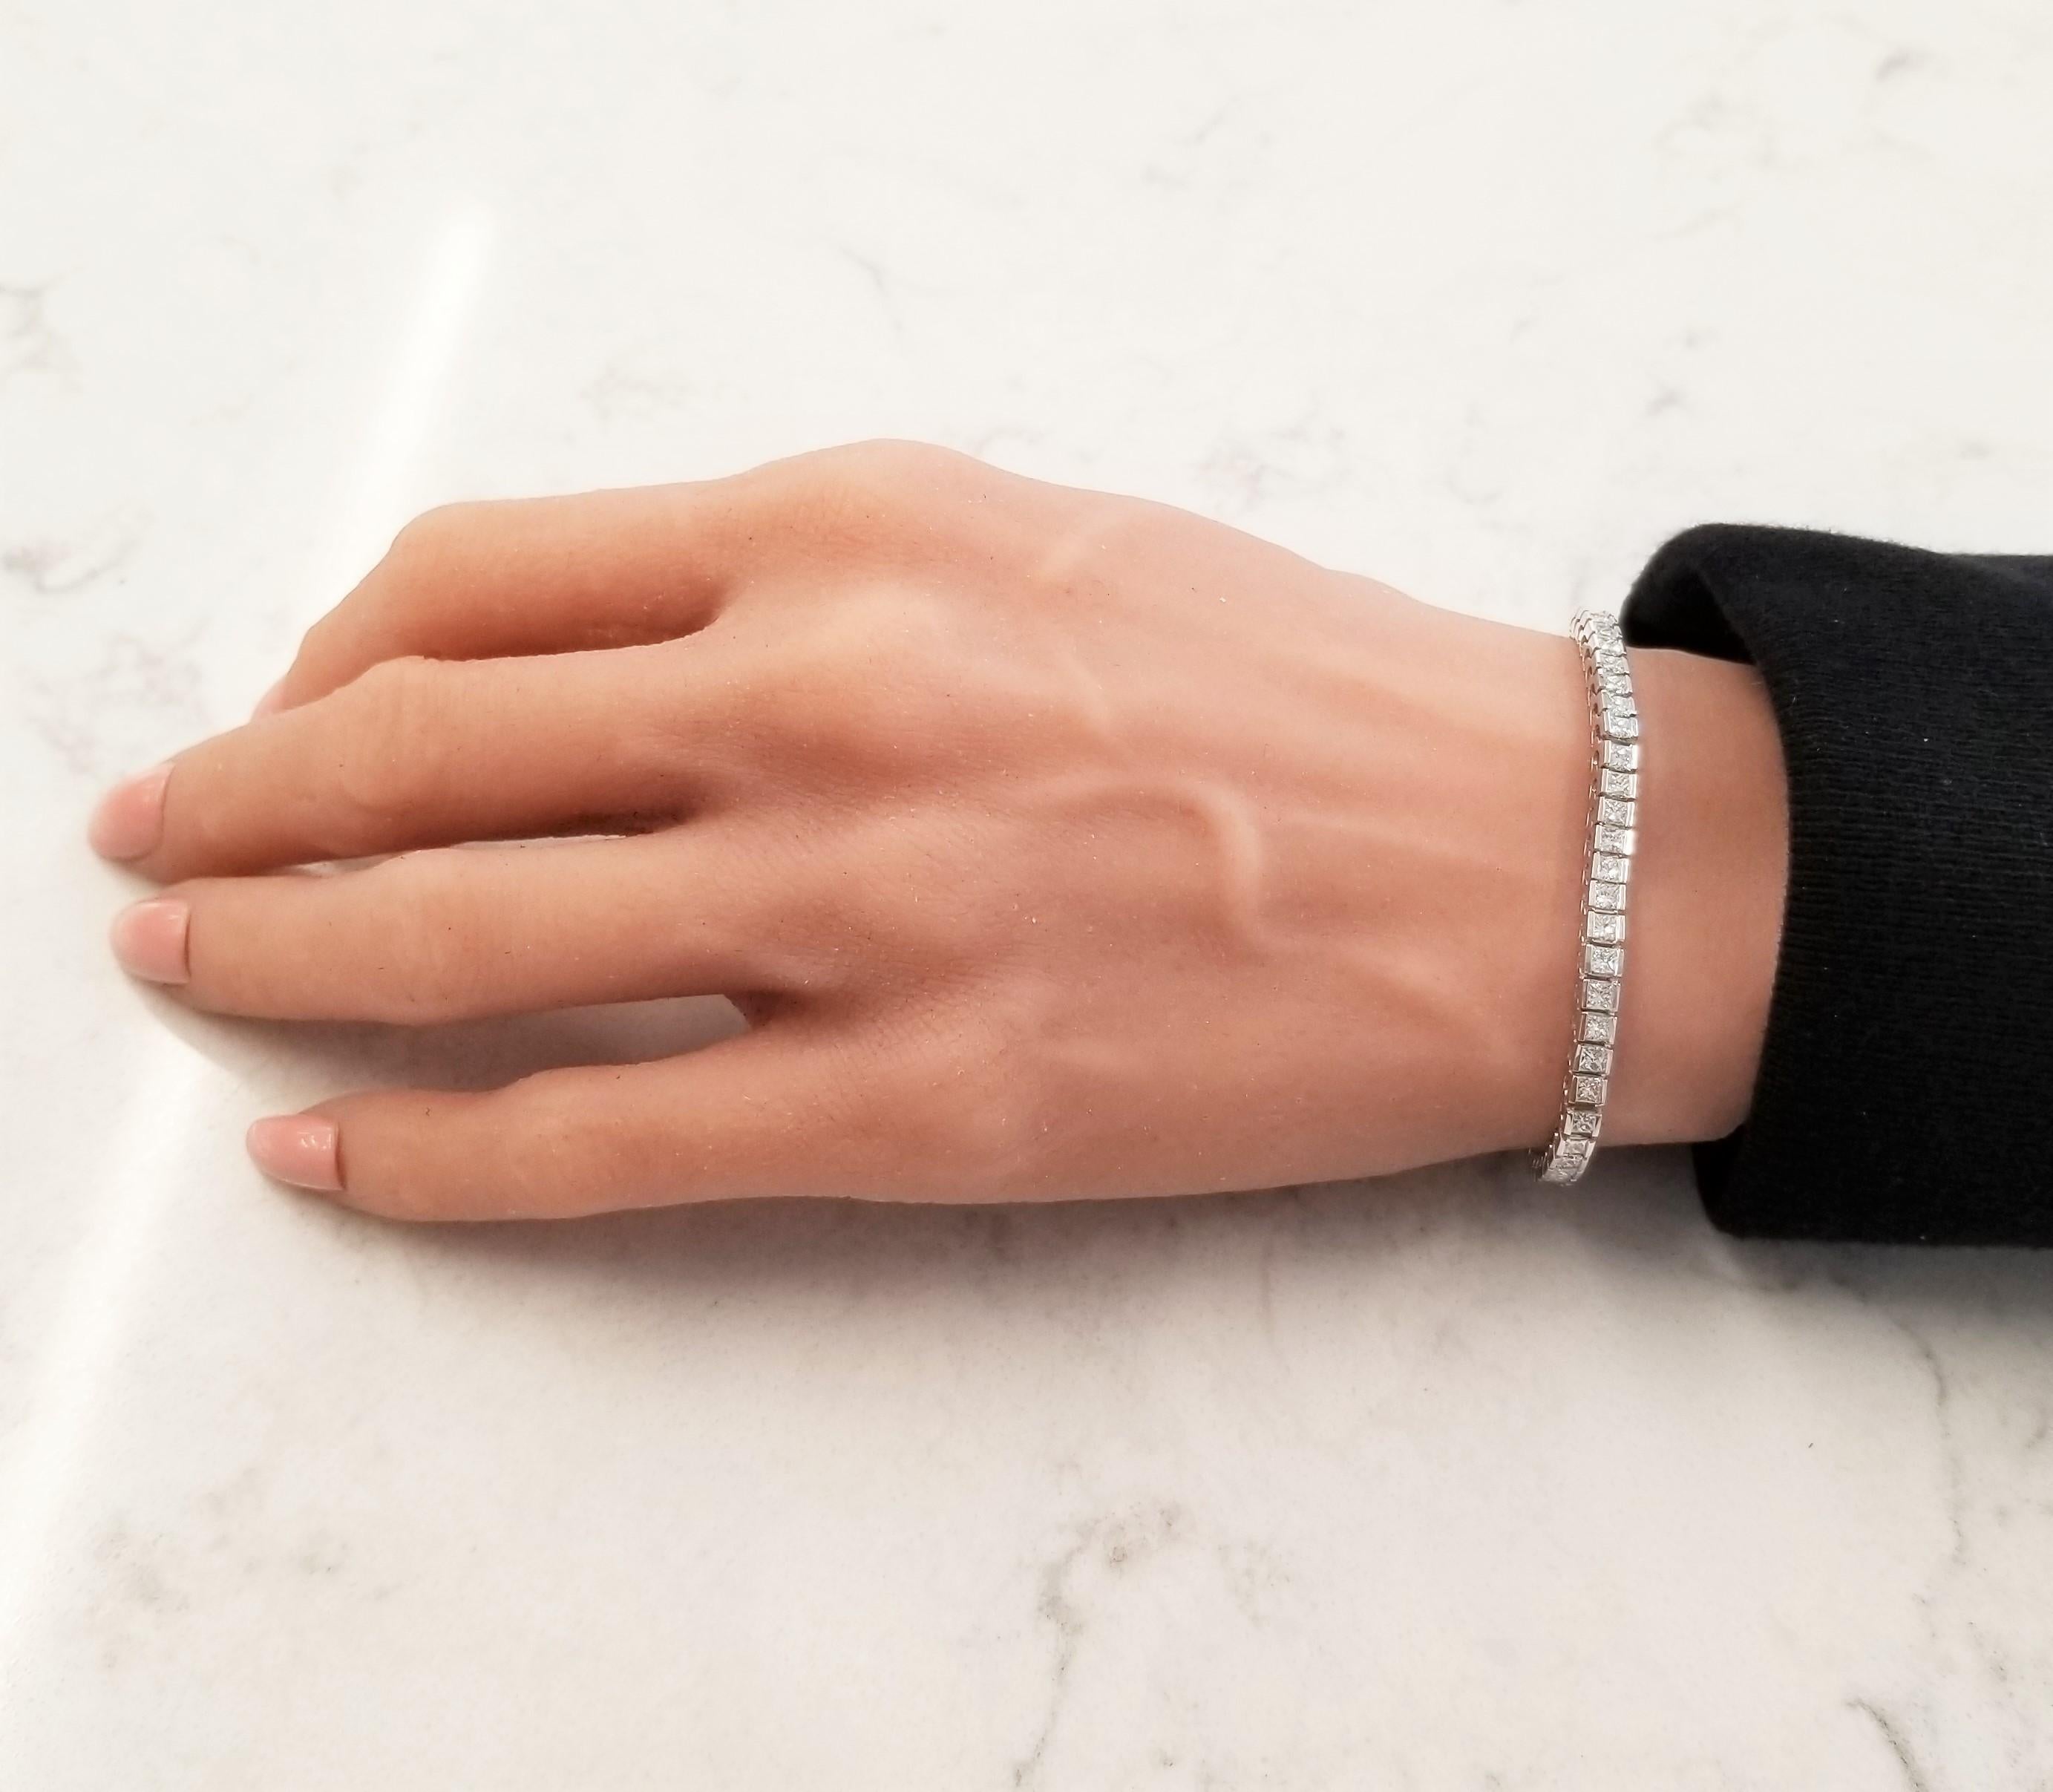 A bracelet fit for a princess! The bracelet features a remarkable 4.70 carat total of dazzling diamonds, channel set into a luxurious platinum mounting. Clean and modern, different from the typical round diamond tennis bracelet.  It's perfect to